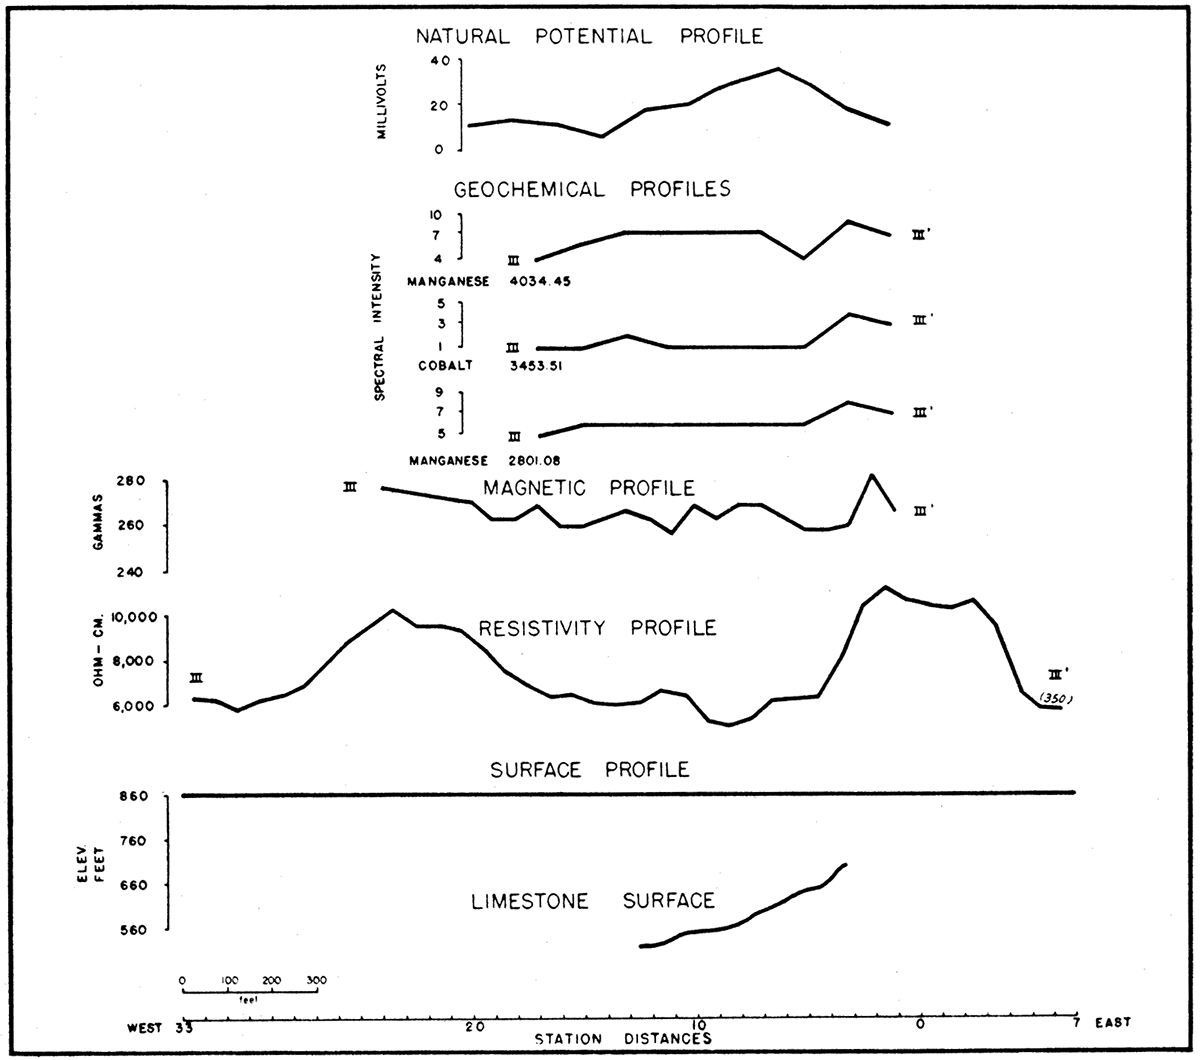 Profiles along traverse III-III' in the Mullen area, showing magnetic, natural potential, resistivity, and geochemical anomalies, and configuration of the top of the limestone.